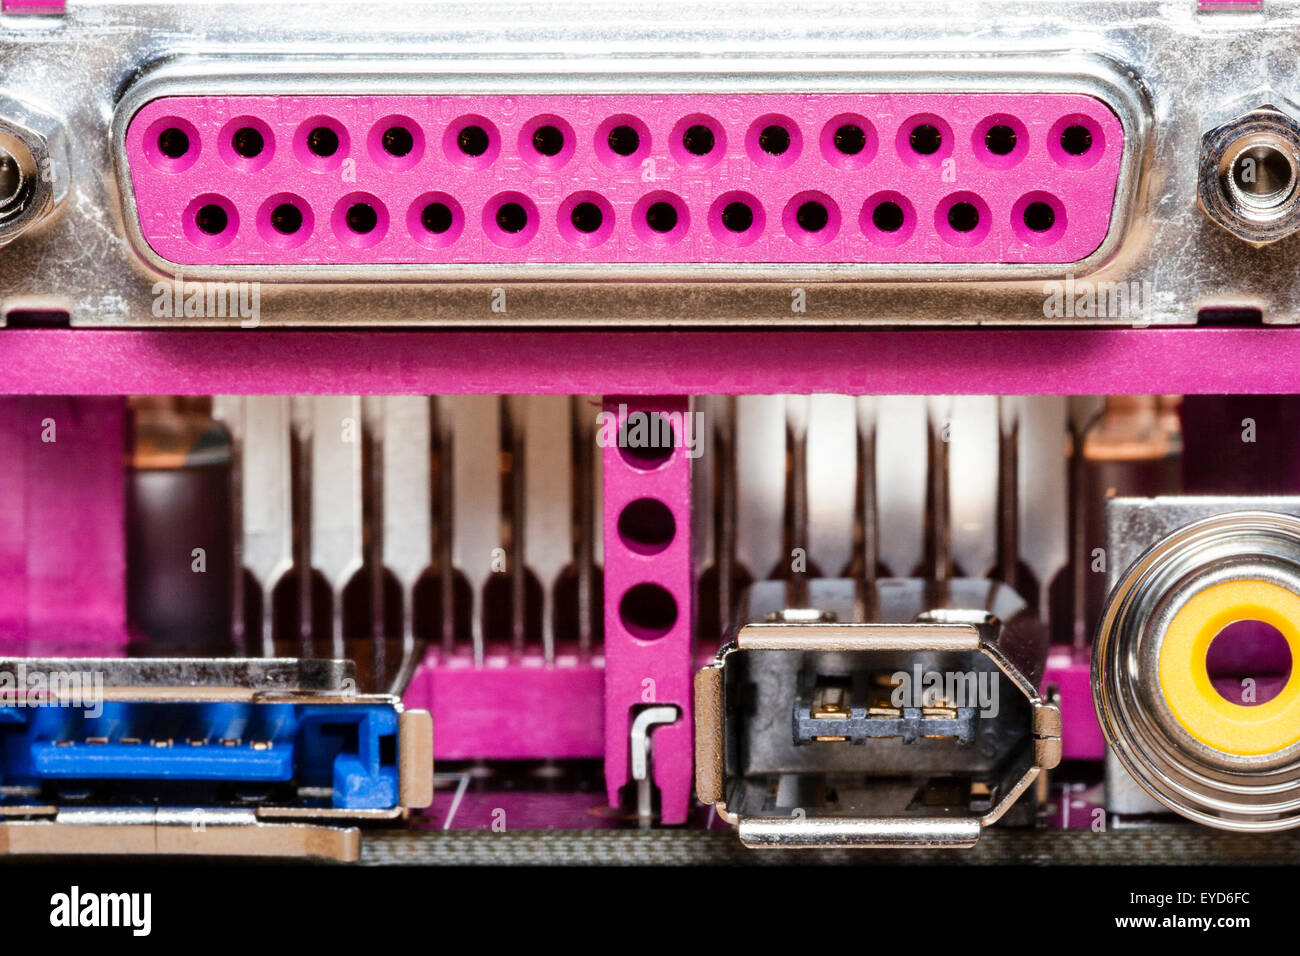 Intel computer Motherboard socket panel at back. Parallel port for monitors output, colour coded pink. Firewire port below. Stock Photo